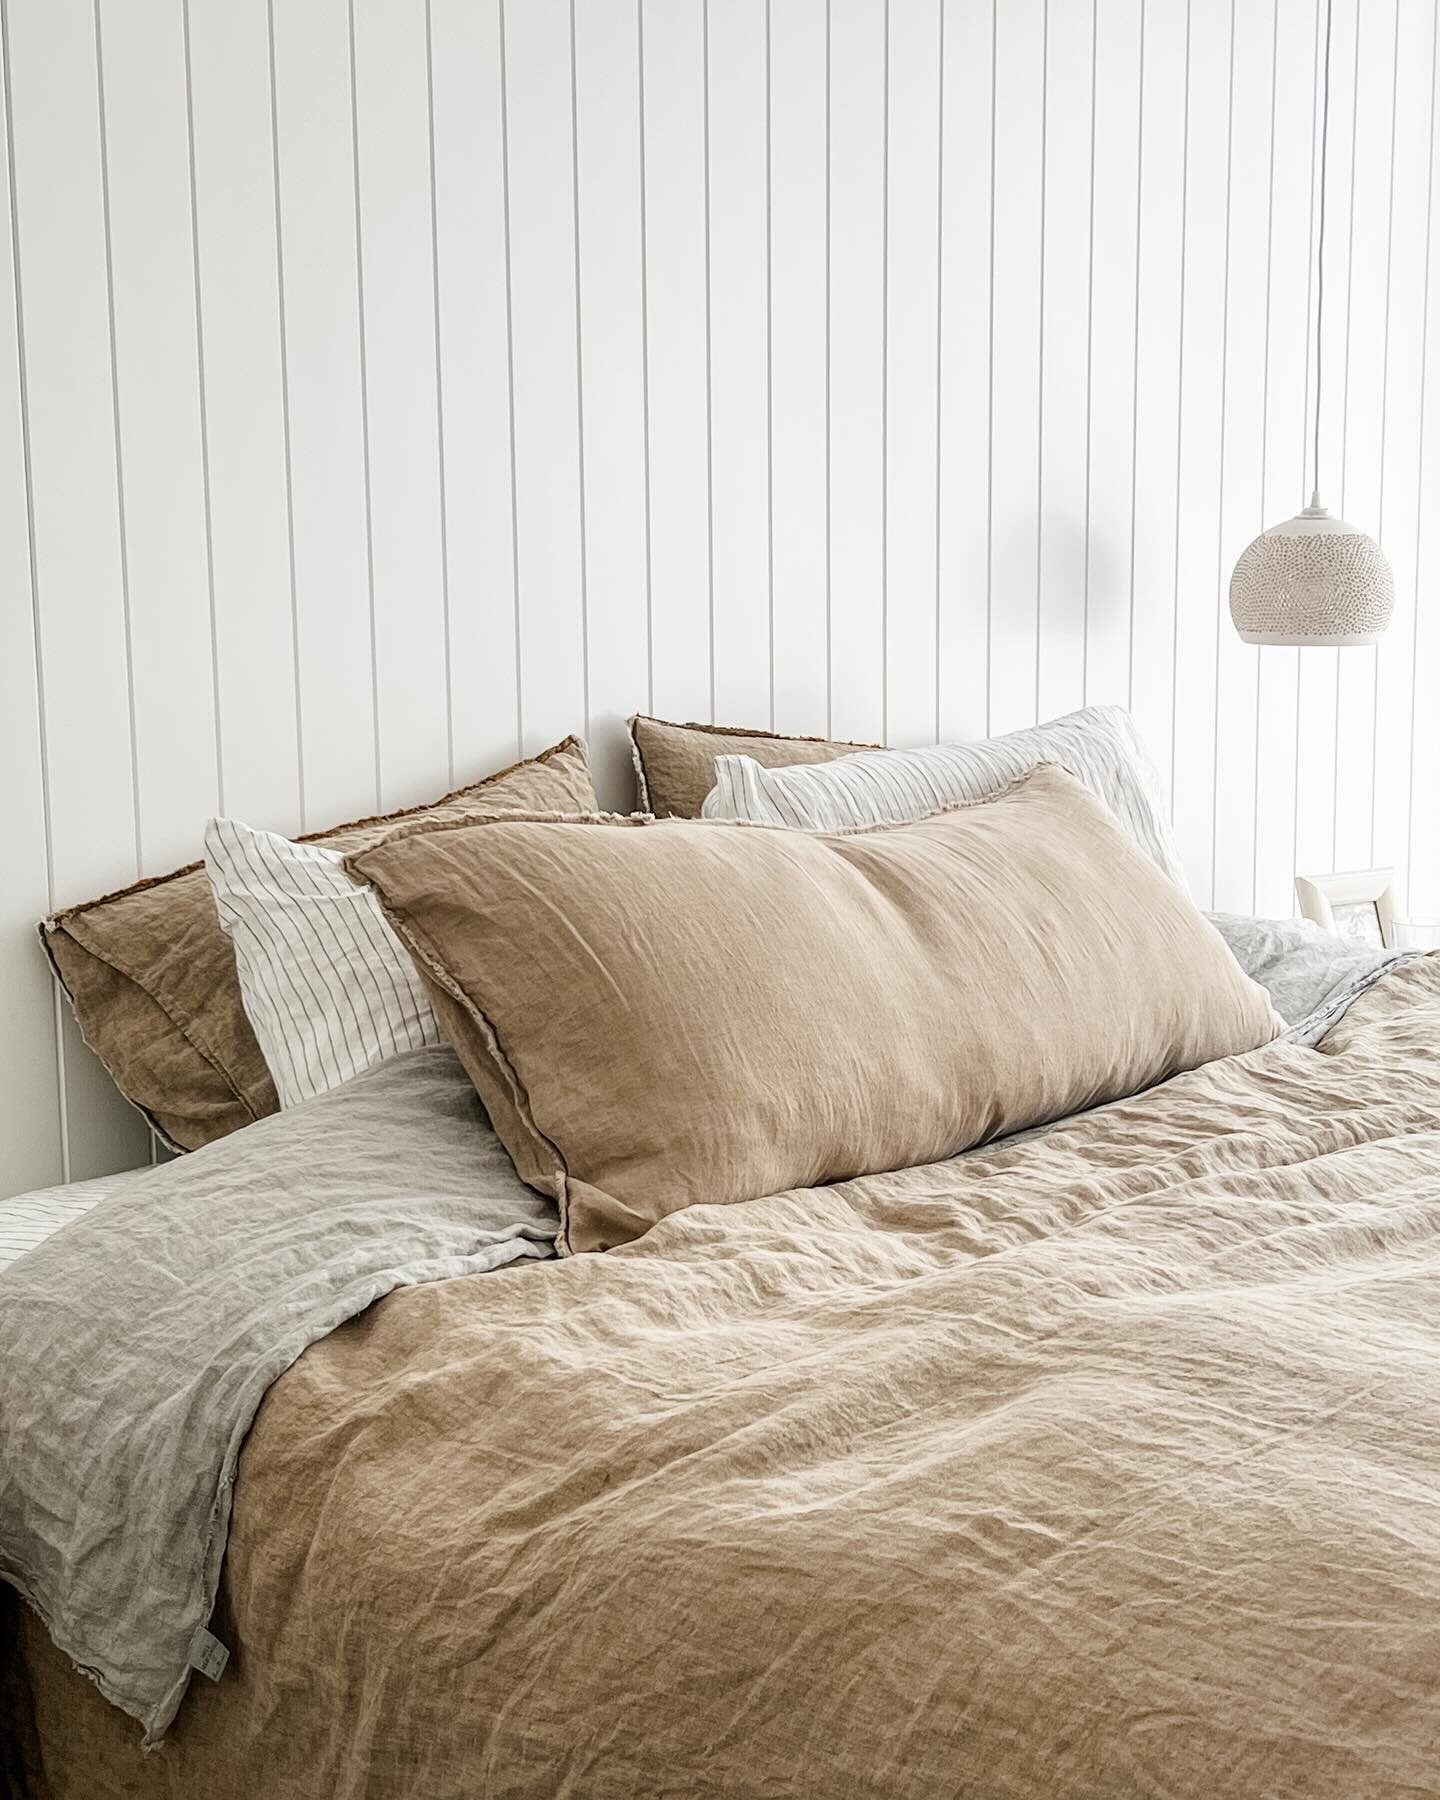 This dreamy bedroom with some of my favourite bedding ❤️

When working on bedrooms, I like creating a room of relaxation, of harmony, somewhere calming, where my clients can retreat.

Oh and in case you haven&rsquo;t noticed I love linen bedding, act